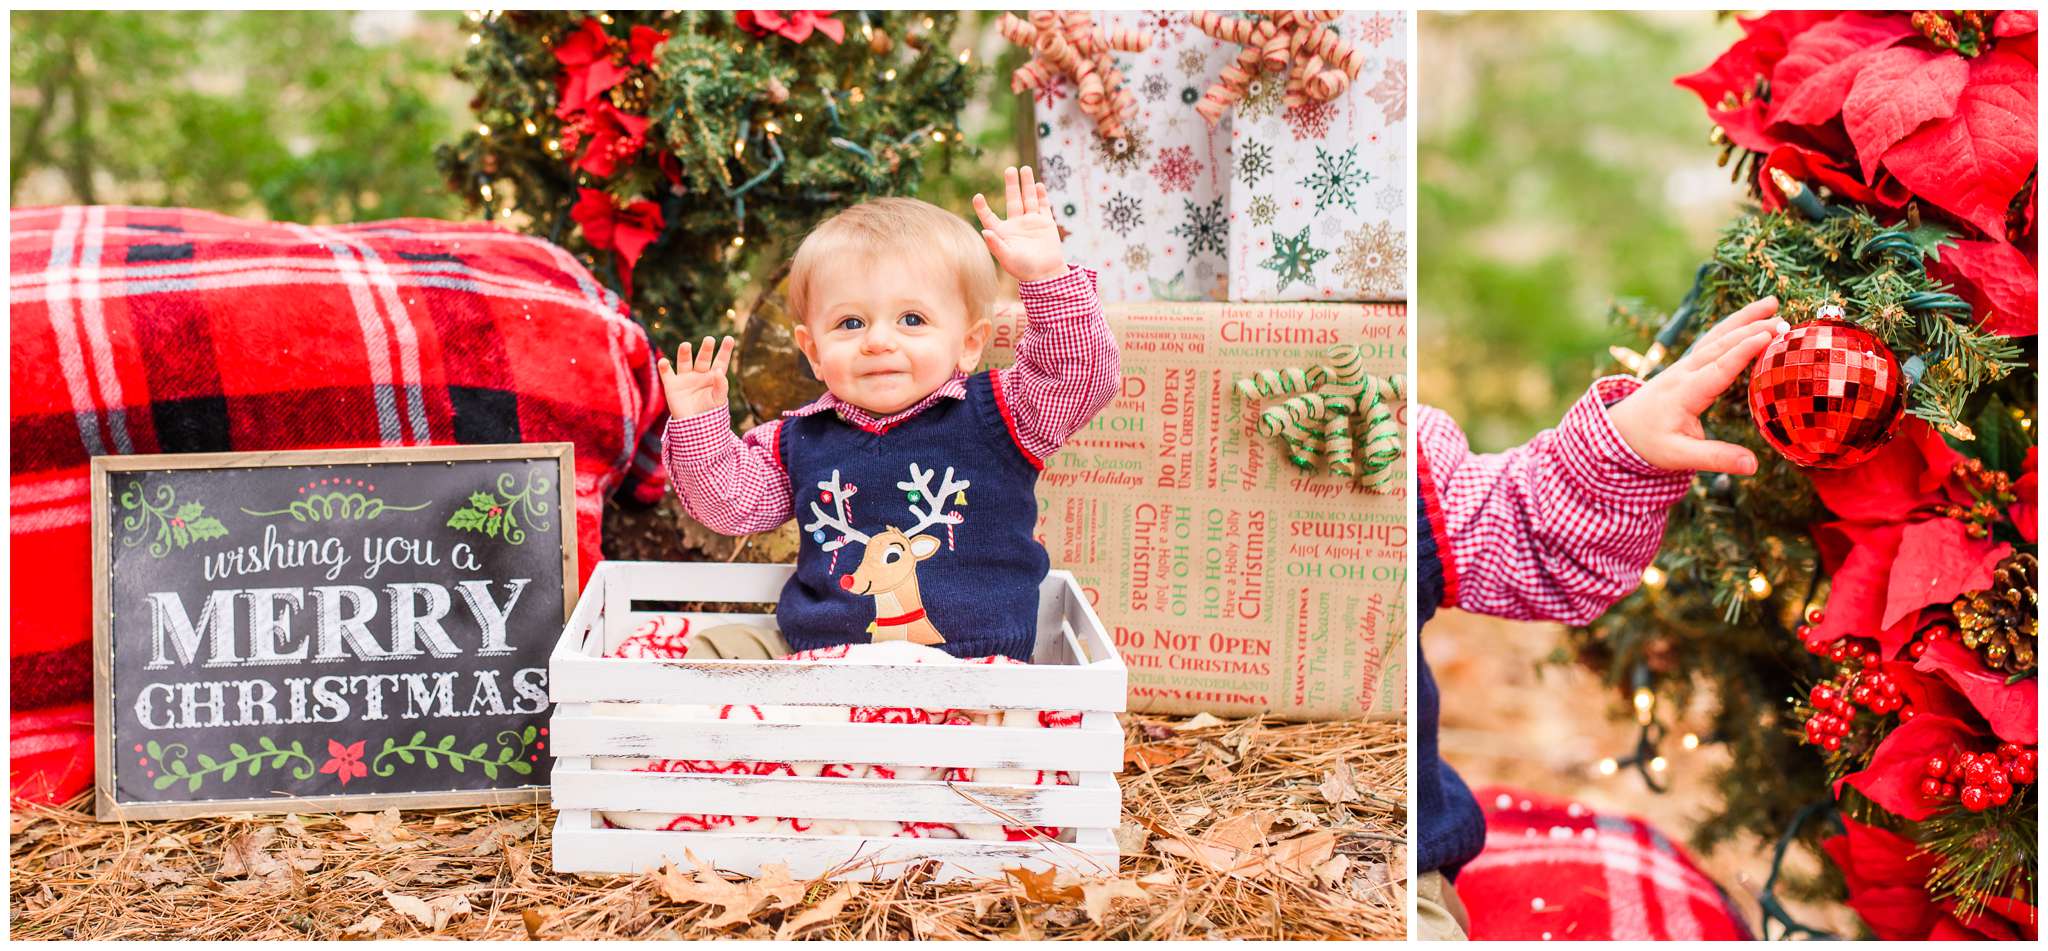  This little cutie is Carter! Look at that little hand on the ornament. He was just perfect for his photo shoot! 